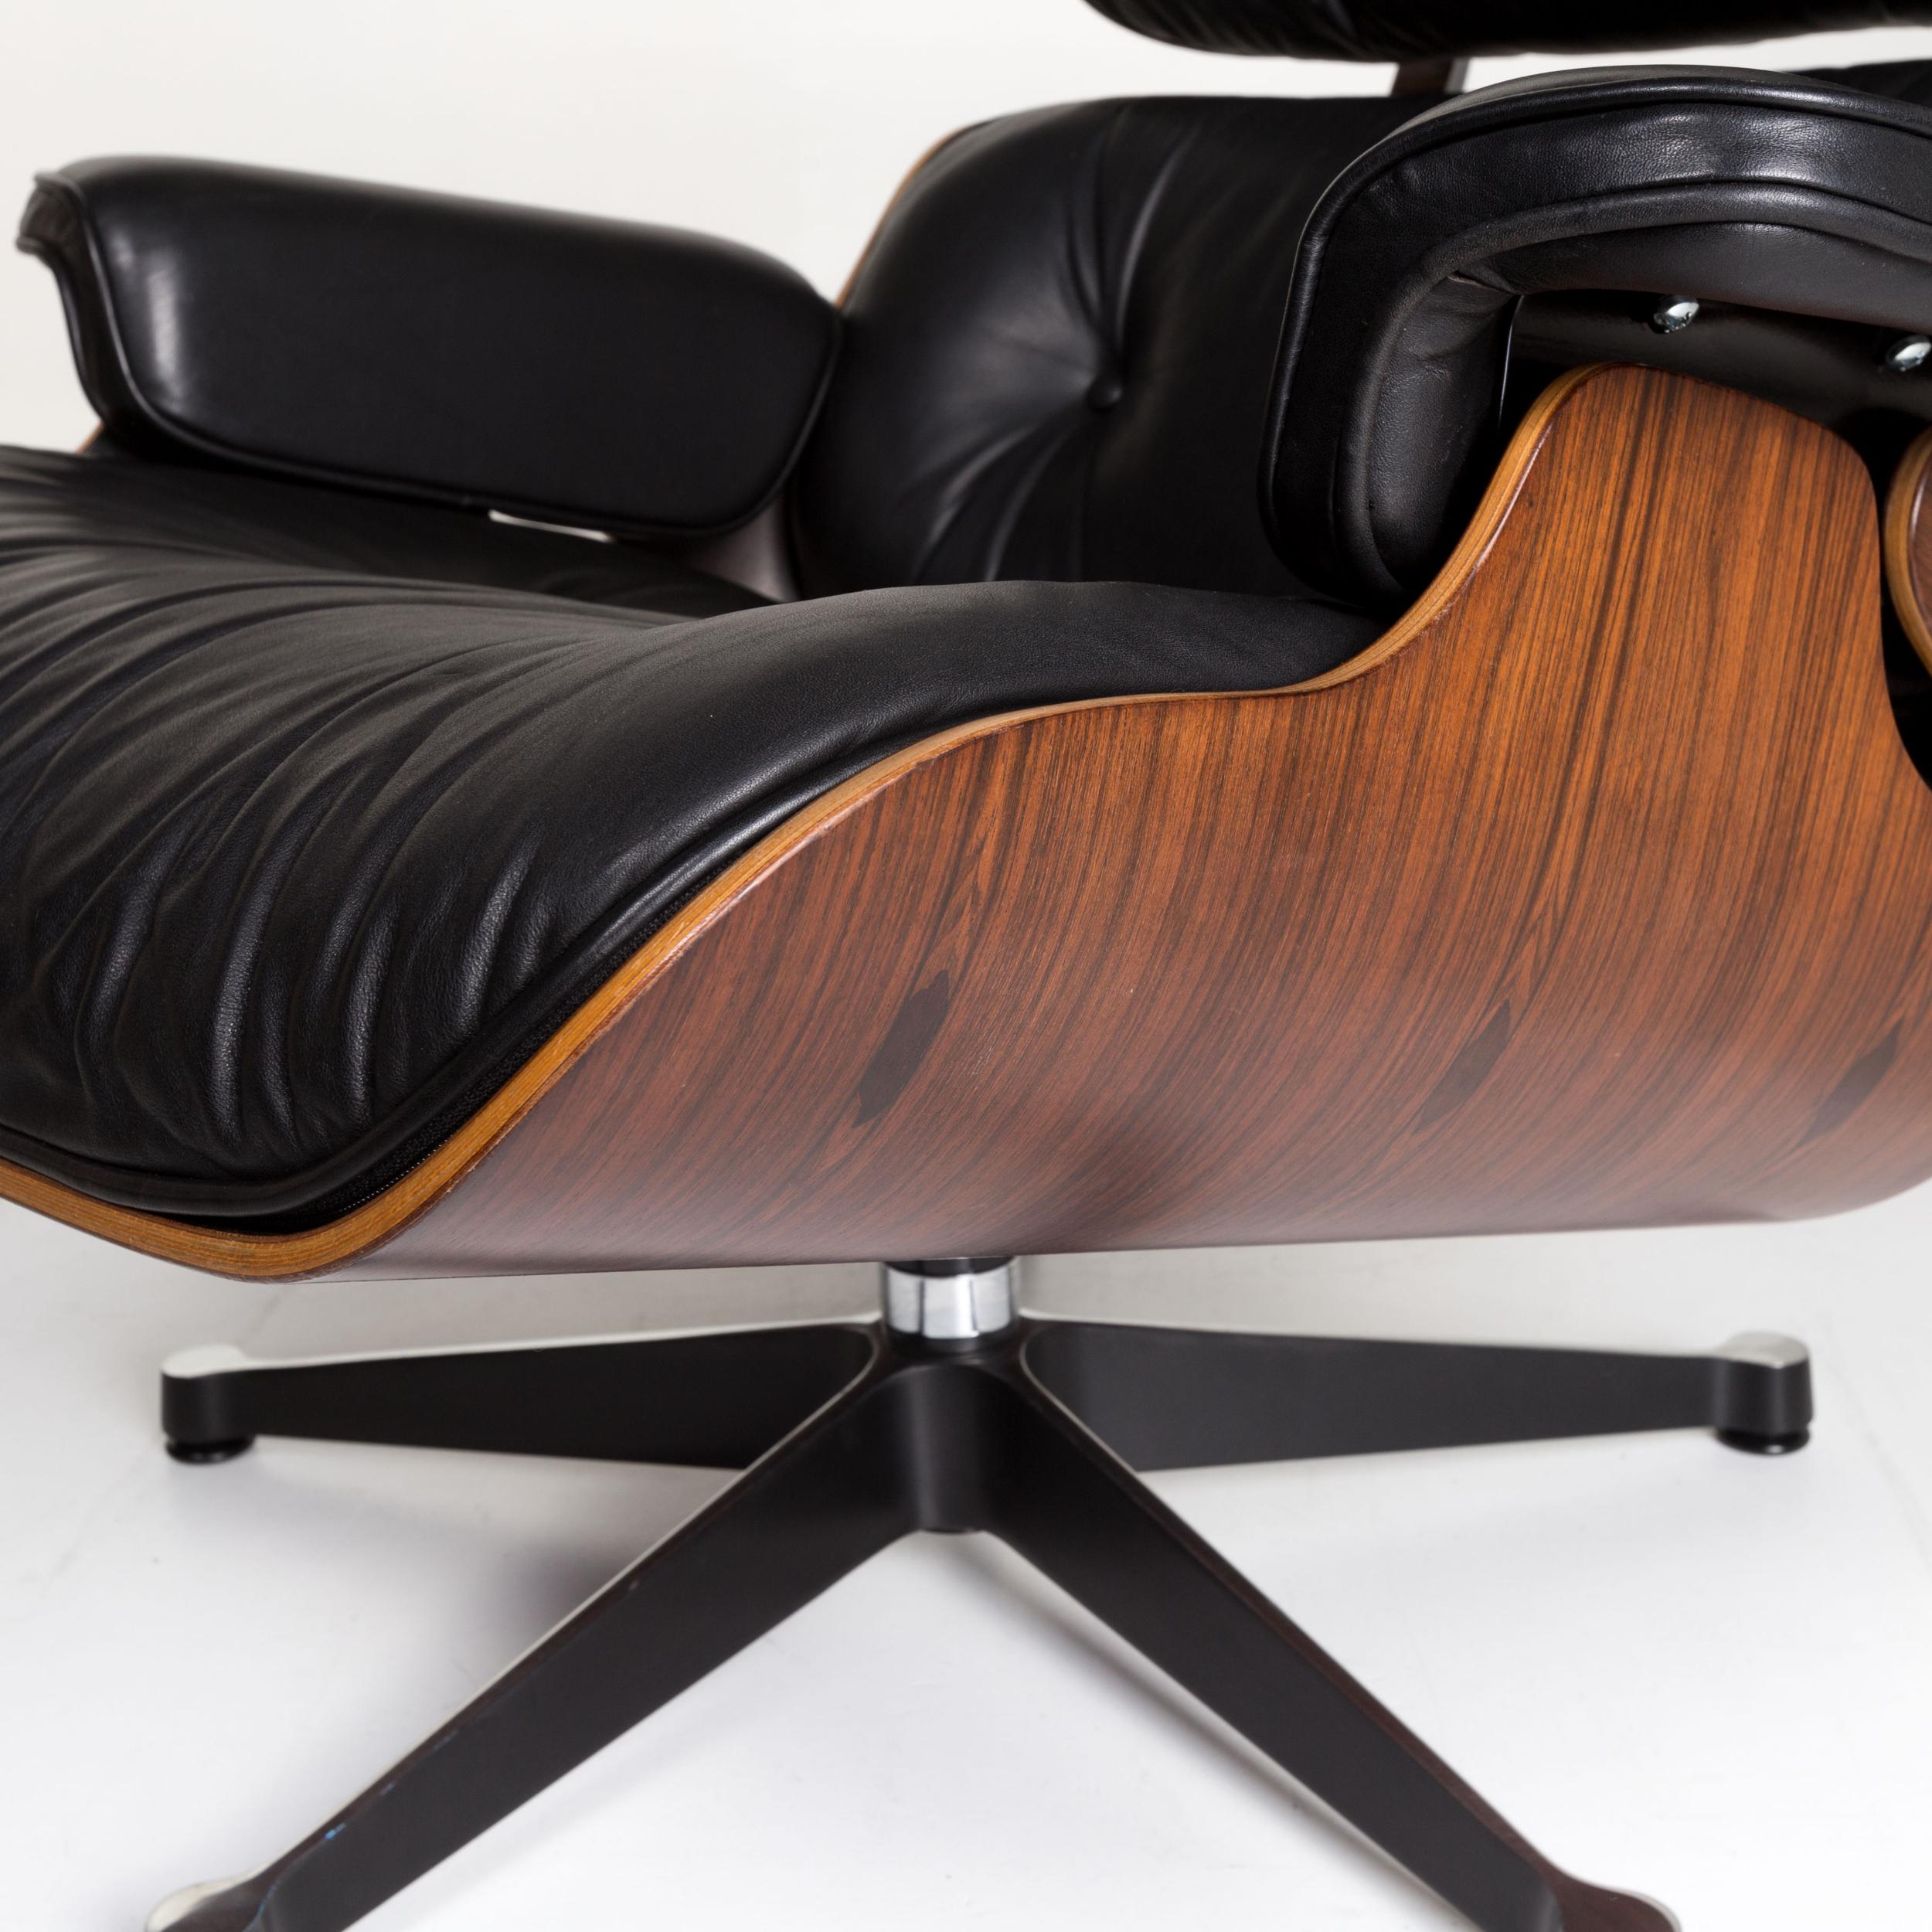 We present to you a Vitra Eames lounge chair leather armchair black.

Product measurements in centimeters:

depth: 86
width: 83
height: 84
seat height: 40
rest height: 50
seat depth: 50
seat width: 53
back height: 60.

 